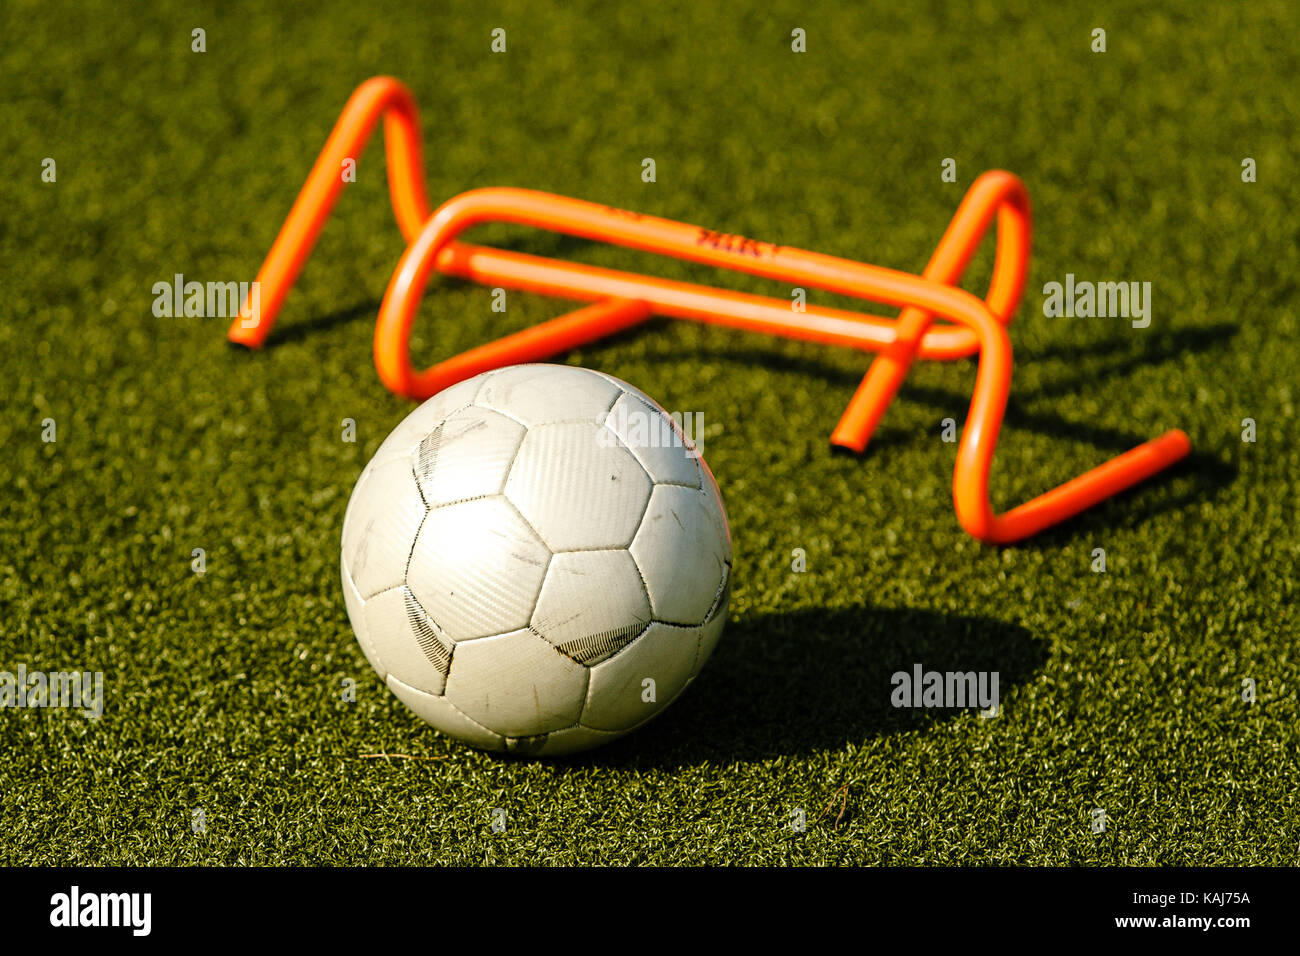 Soccer practice gear lies on the grass Stock Photo